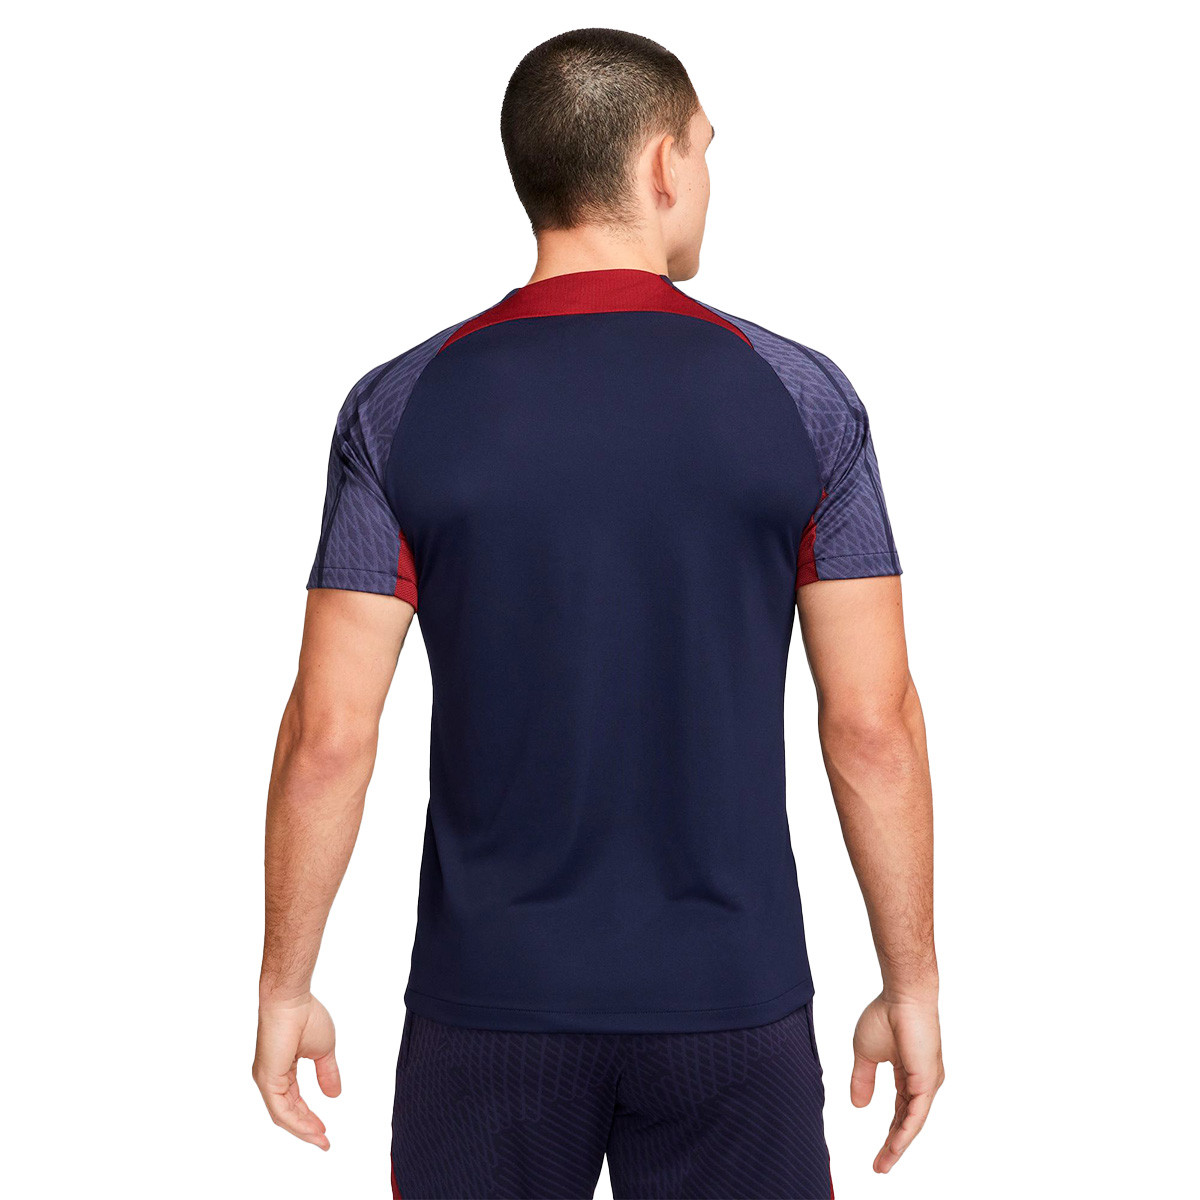 PSG Maillot 100% polyester - Collection Officielle Paris Saint-Germain  Taille Homme - Supporter football